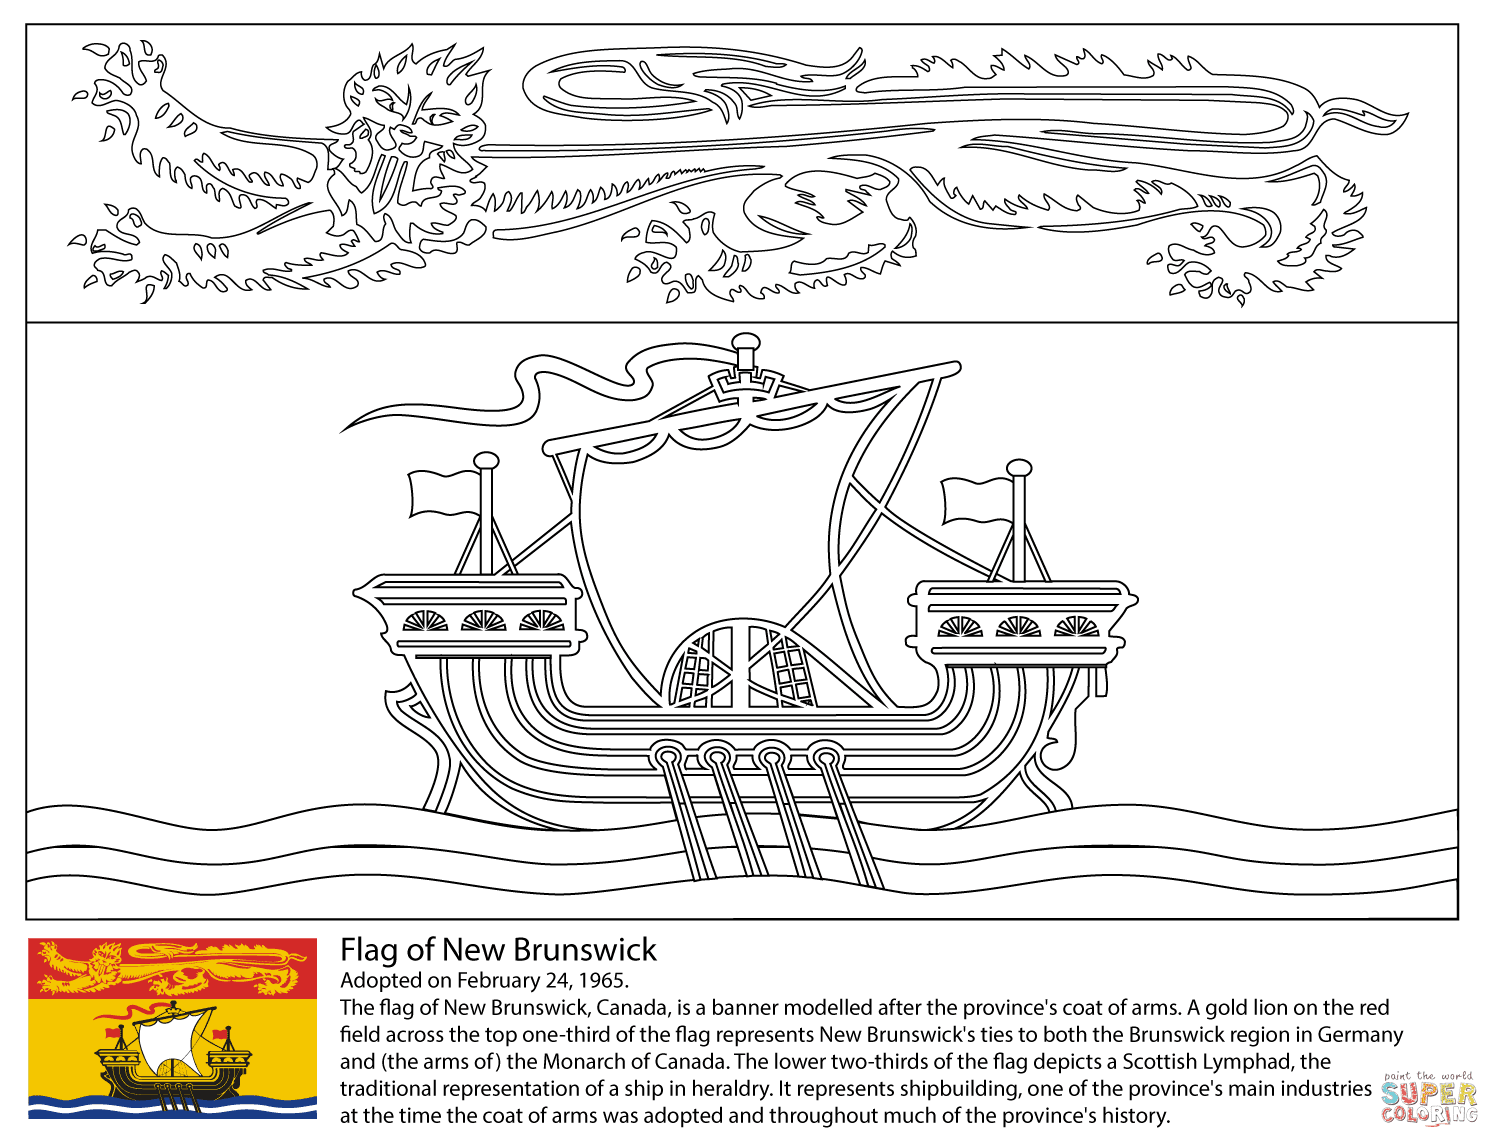 Download Flag of New Brunswick coloring page | Free Printable Coloring Pages